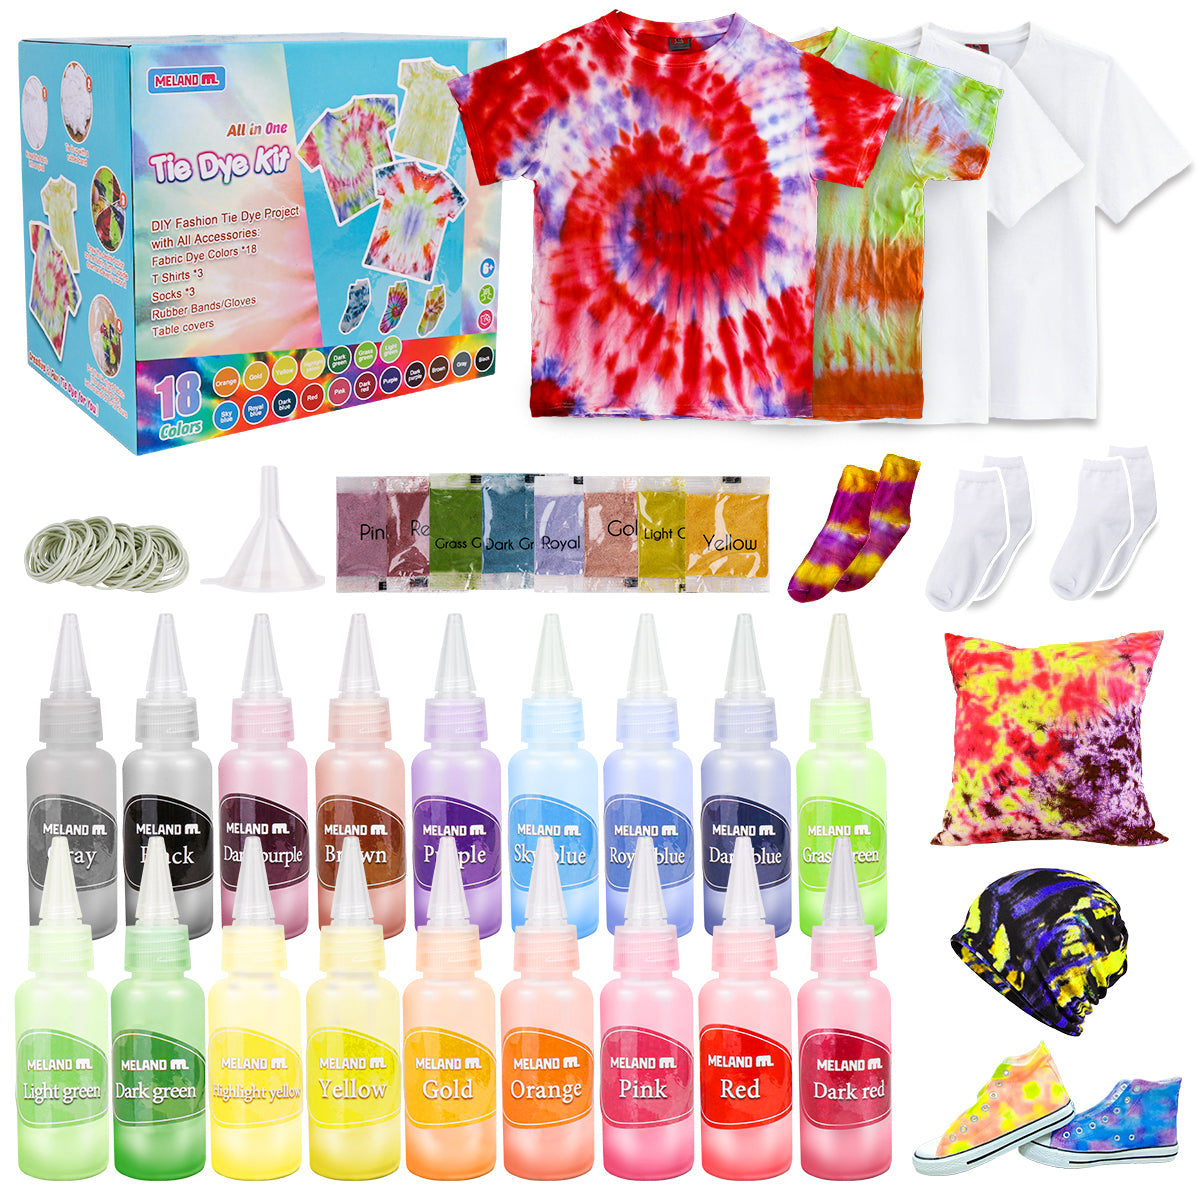 Meland Tie Dye Kit with 3 White T-Shirts, 18 Colors DIY Fabric Tye Dye for  Clothes, Arts and Craft for Kids Girls Age 8-12 Year Old, Birthday